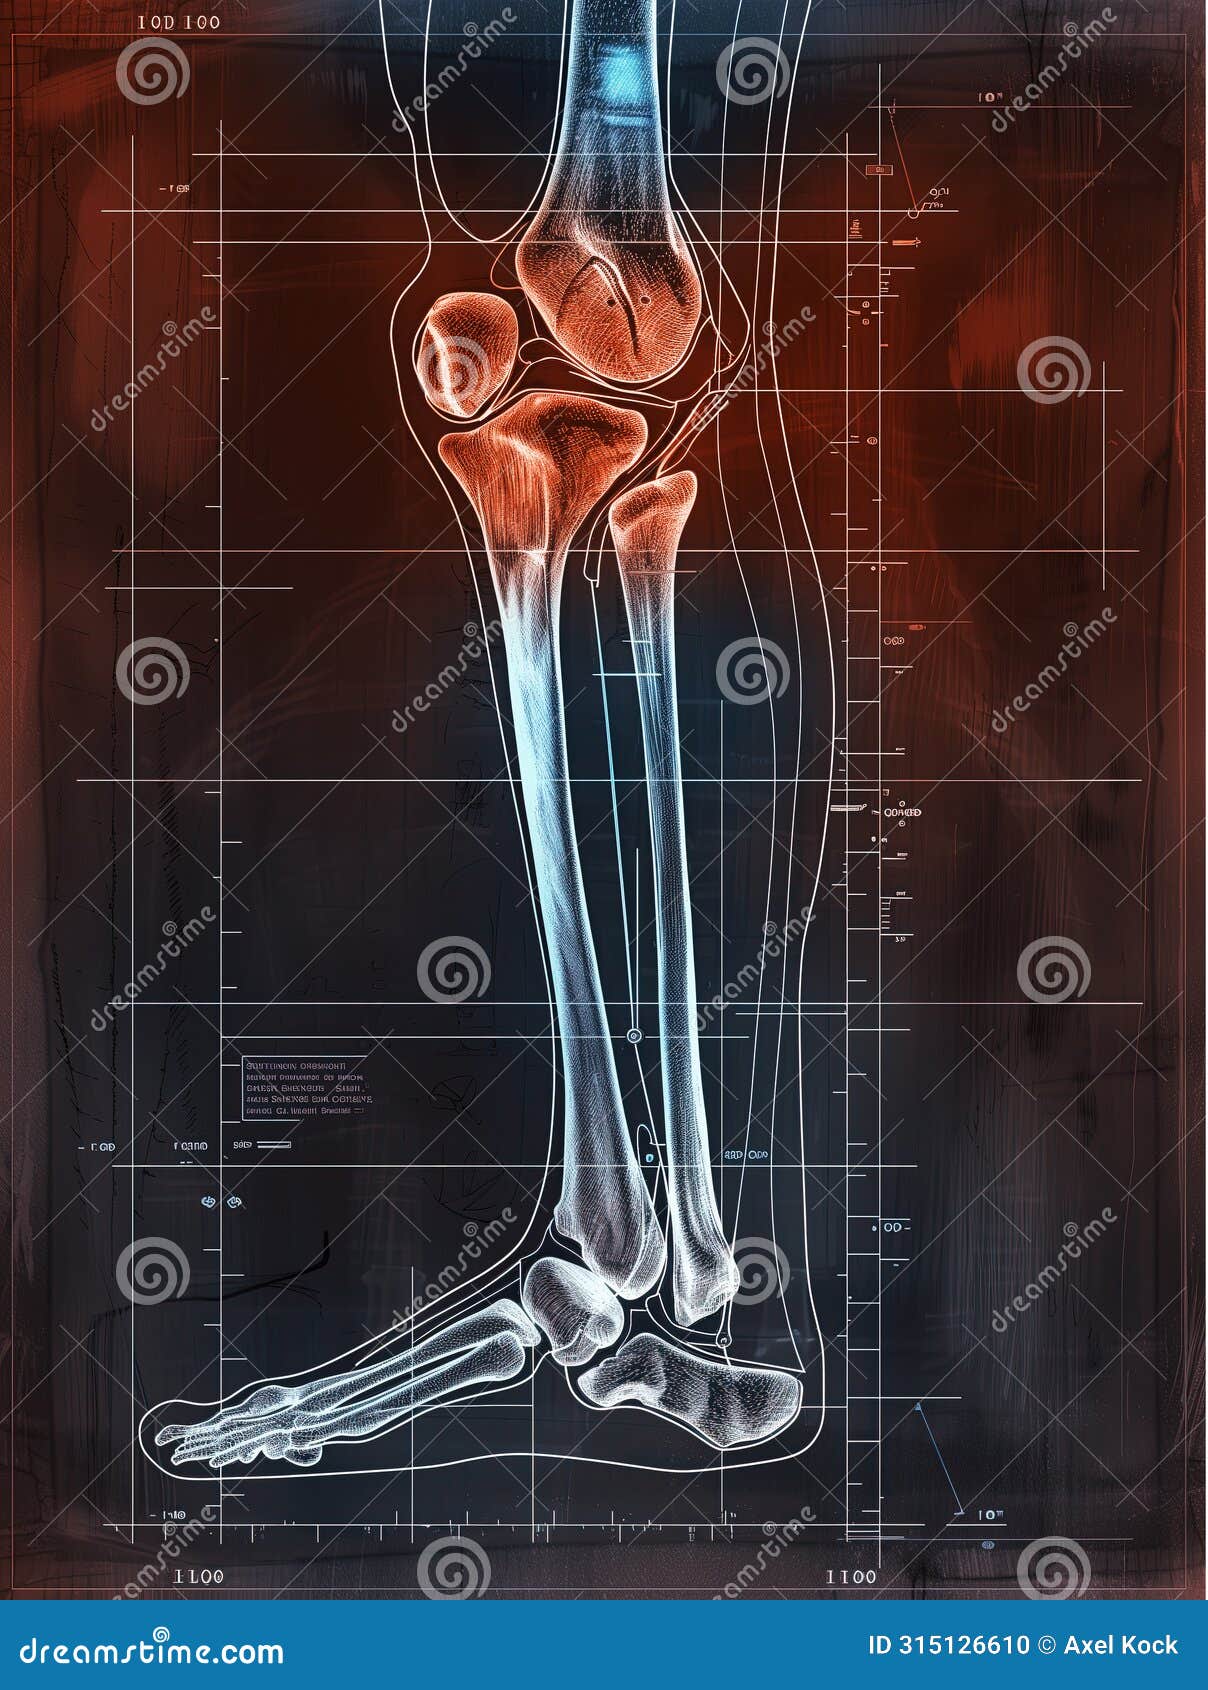 painful knee joint. medically artwork concept